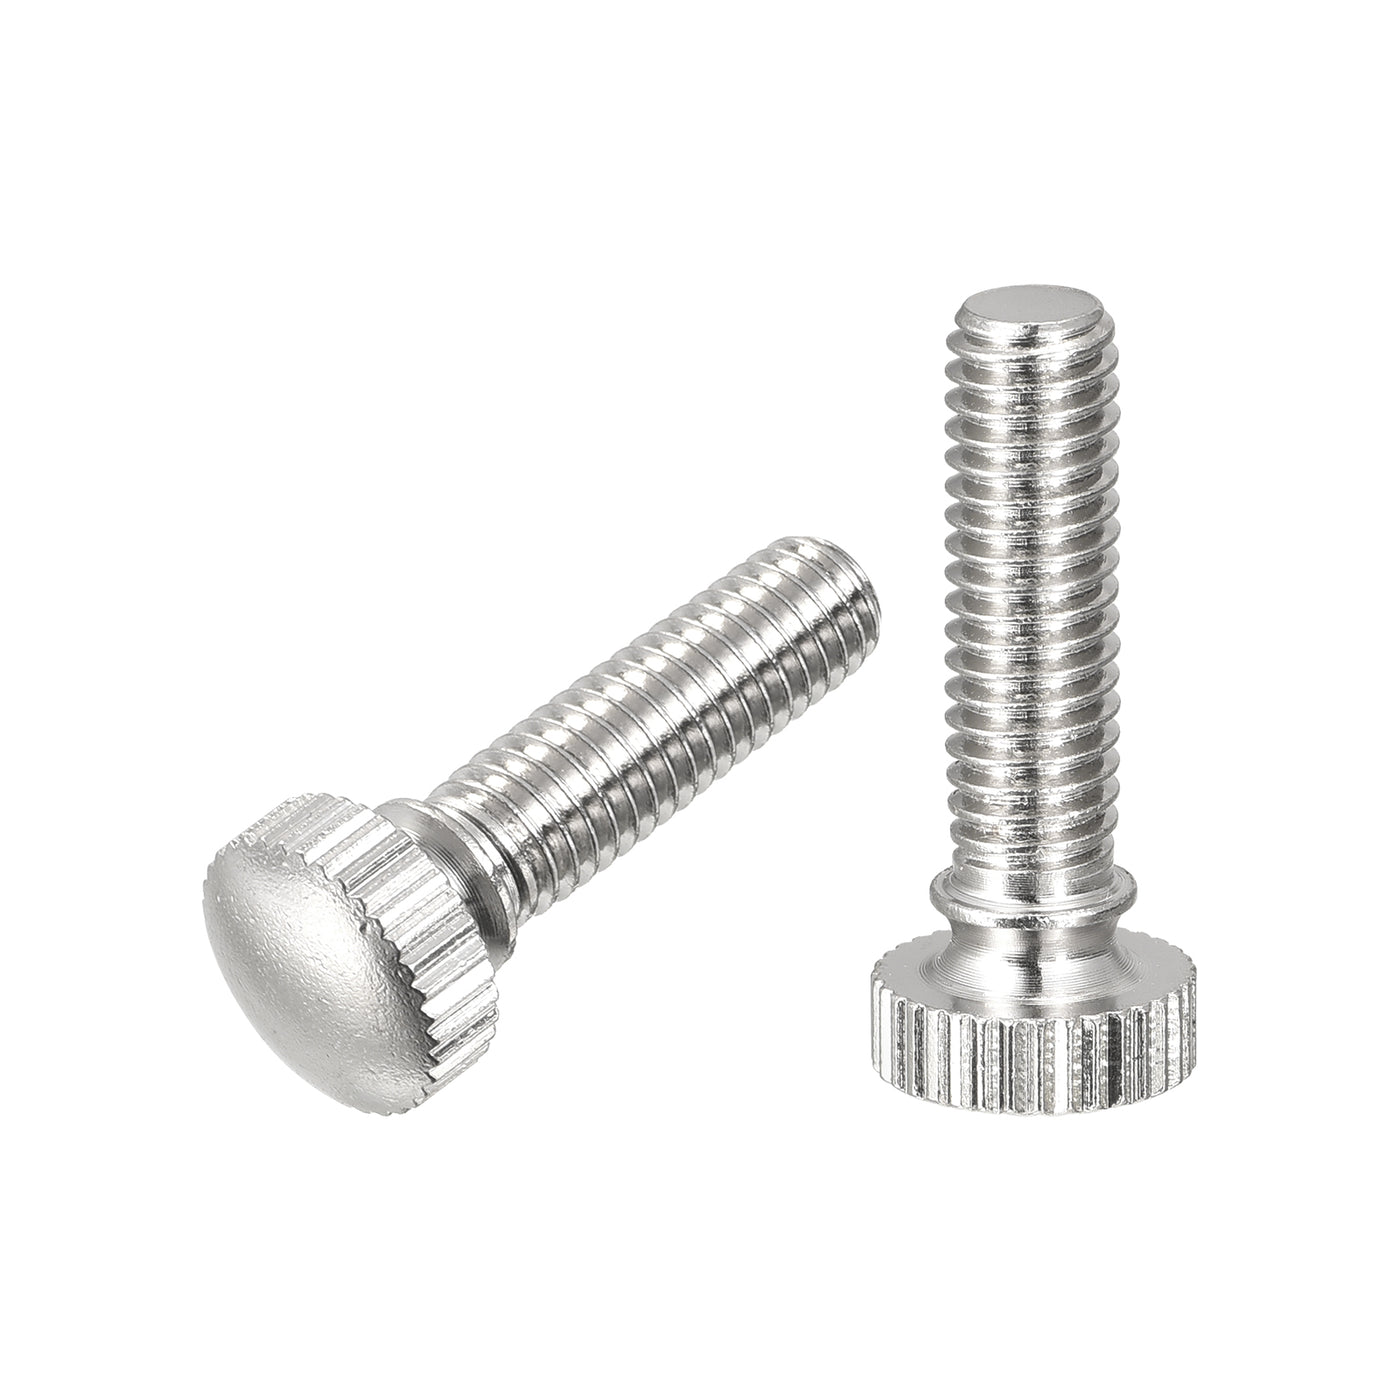 uxcell Uxcell Knurled Thumb Screws, M6x20mm Brass Shoulder Bolts Grip Knobs Fasteners, Nickel Plated 2Pcs